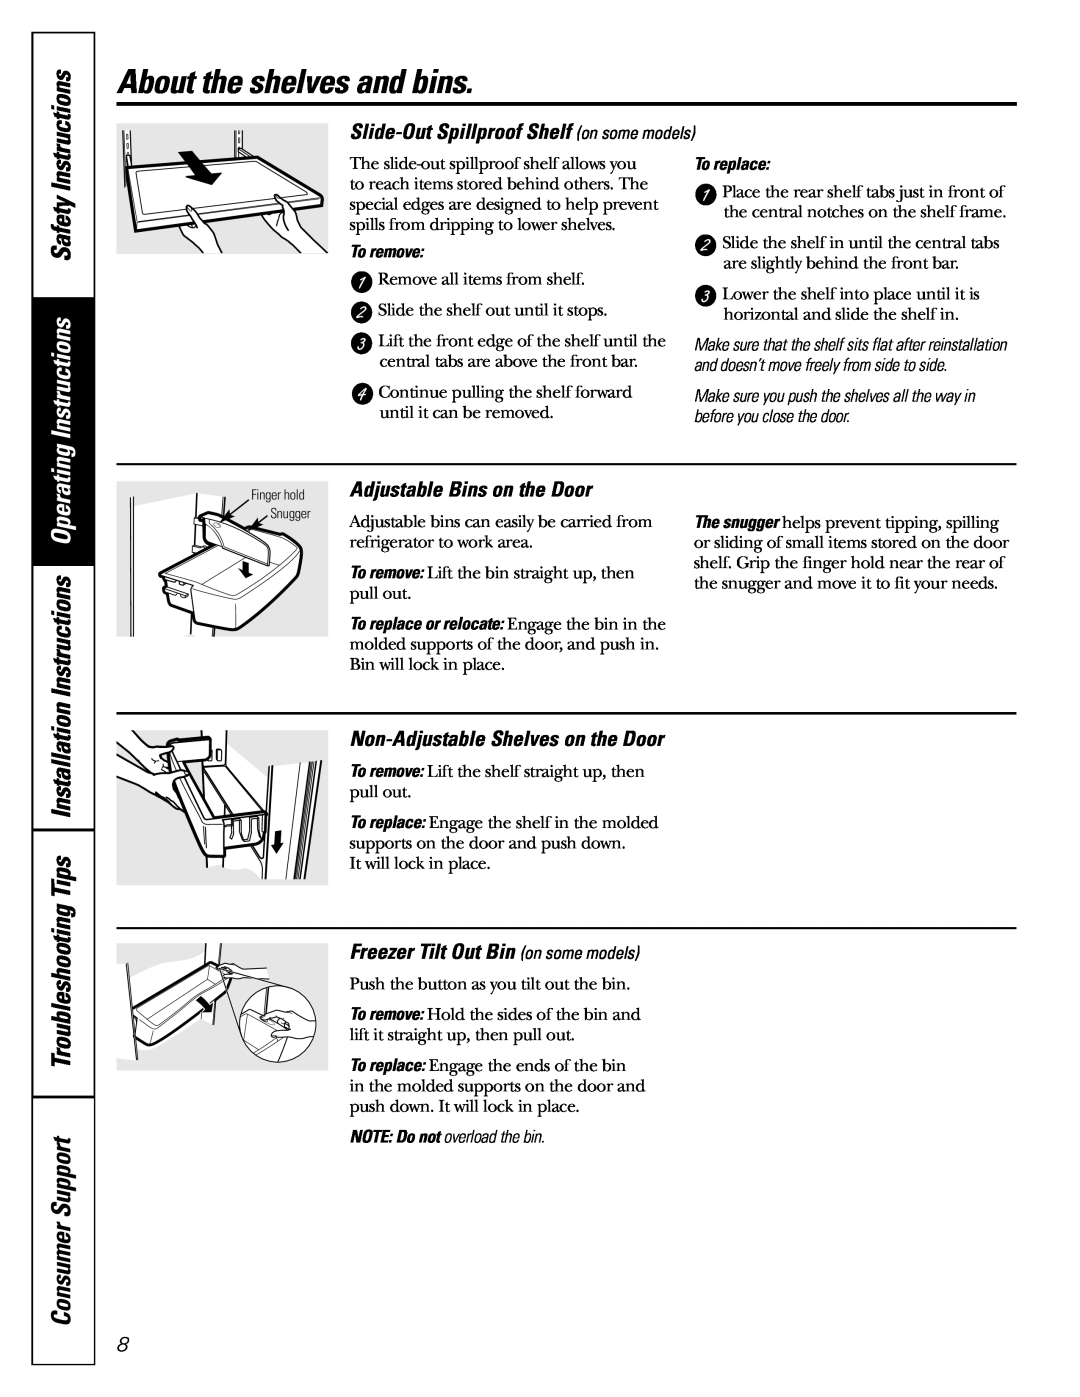 LG Electronics 22, 25 Instructions Safety, Instructions Operating, Slide-OutSpillproof Shelf on some models, To remove 